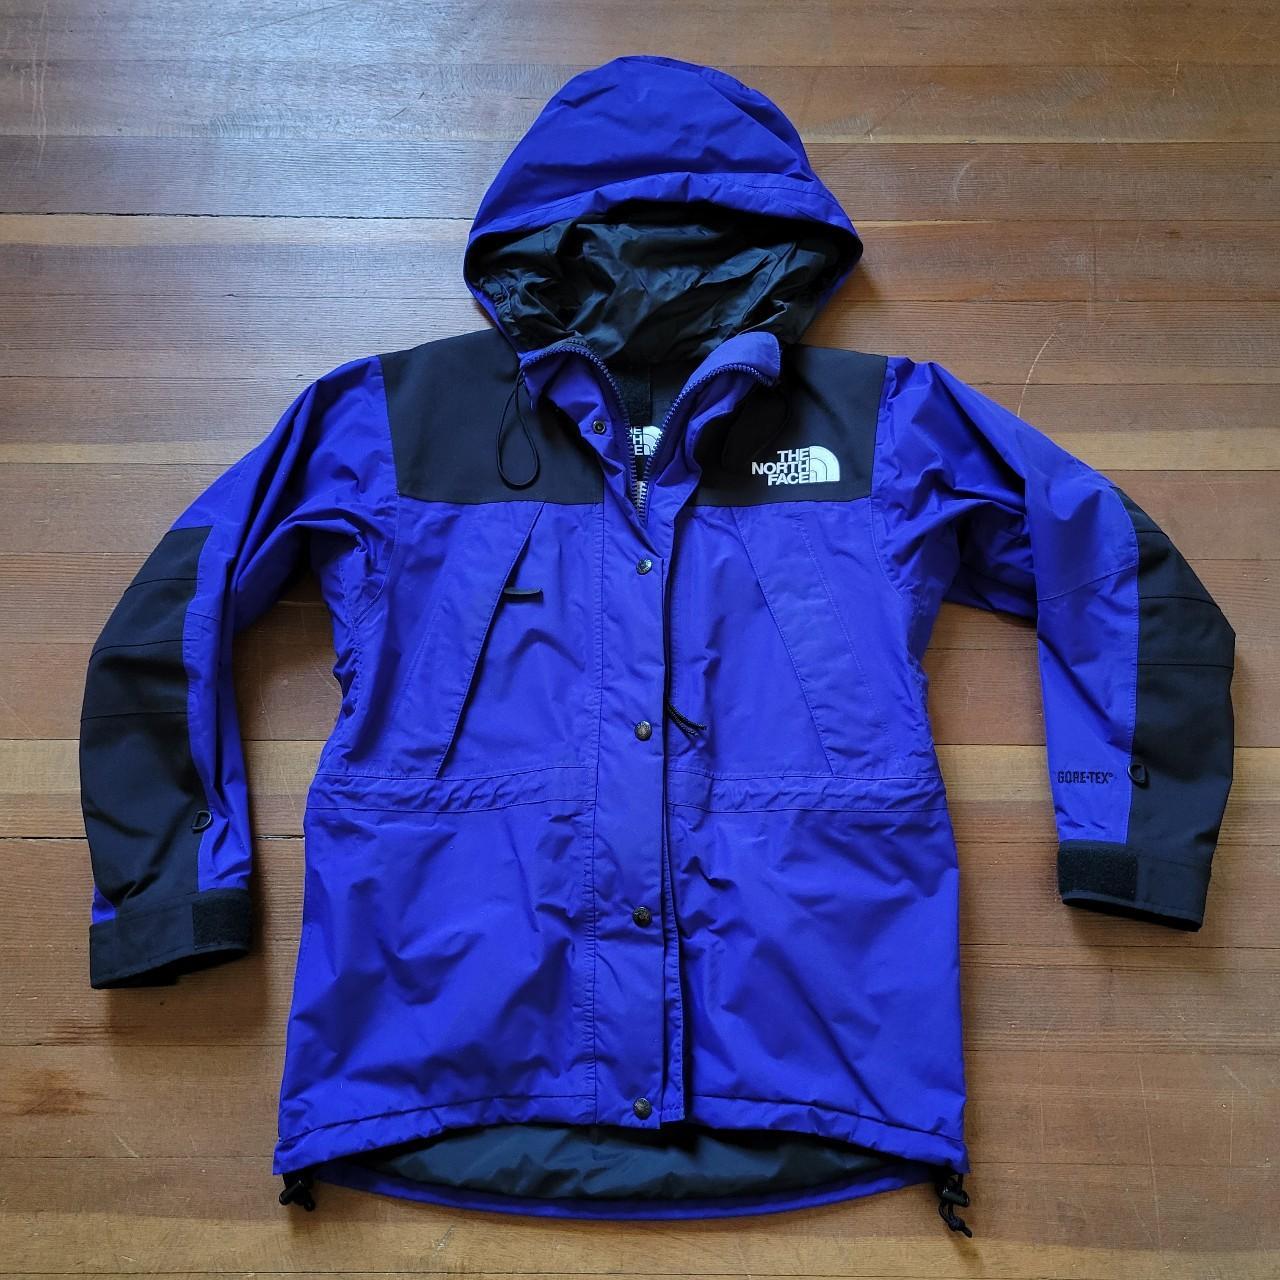 The North Face Women's Blue and Black Coat | Depop